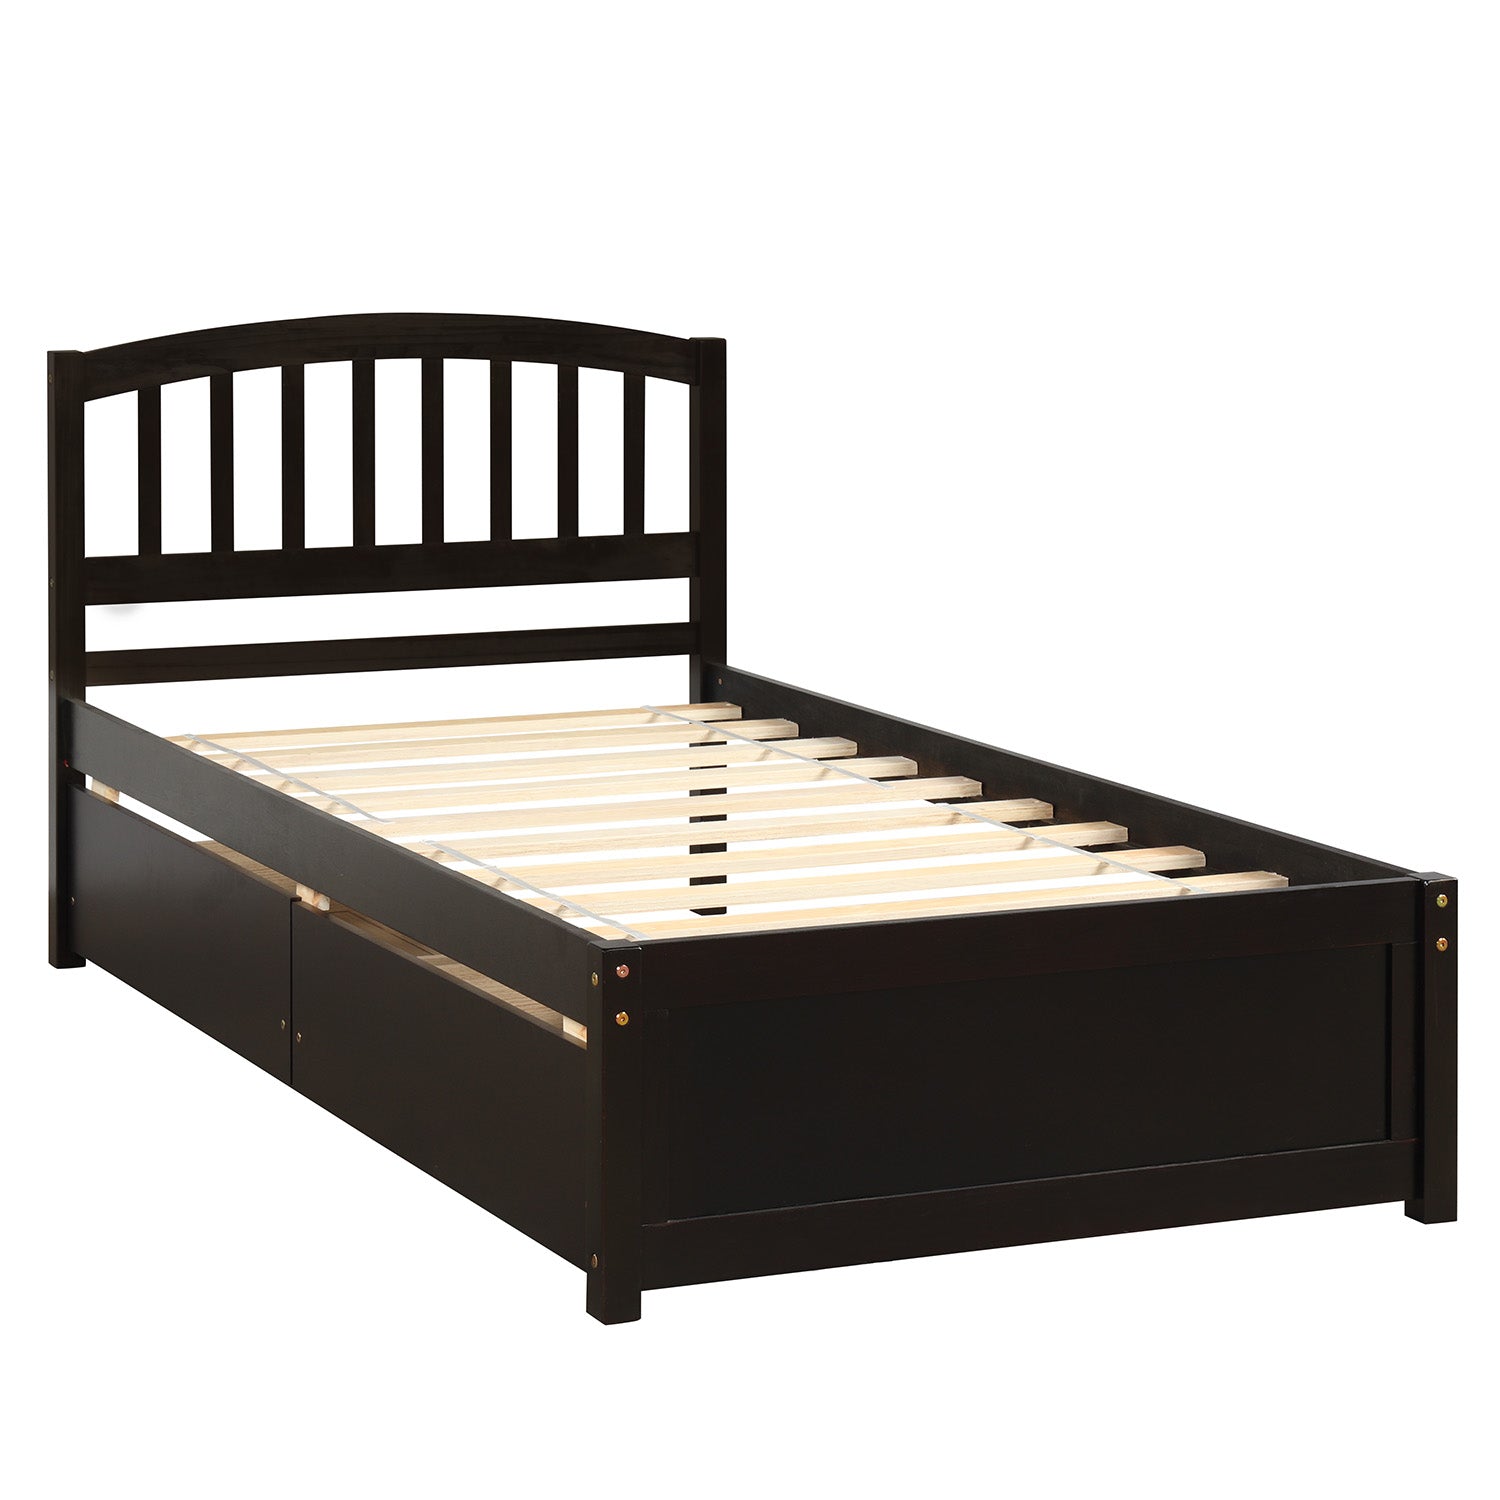 Platform Bed with Storage Drawers, Kids Twin Size Bed Frame No Box Spring Needed, Wood Platform Beds with Headboard and Two Drawers, Modern Single Bed Bedroom Furniture, Espresso, J1164